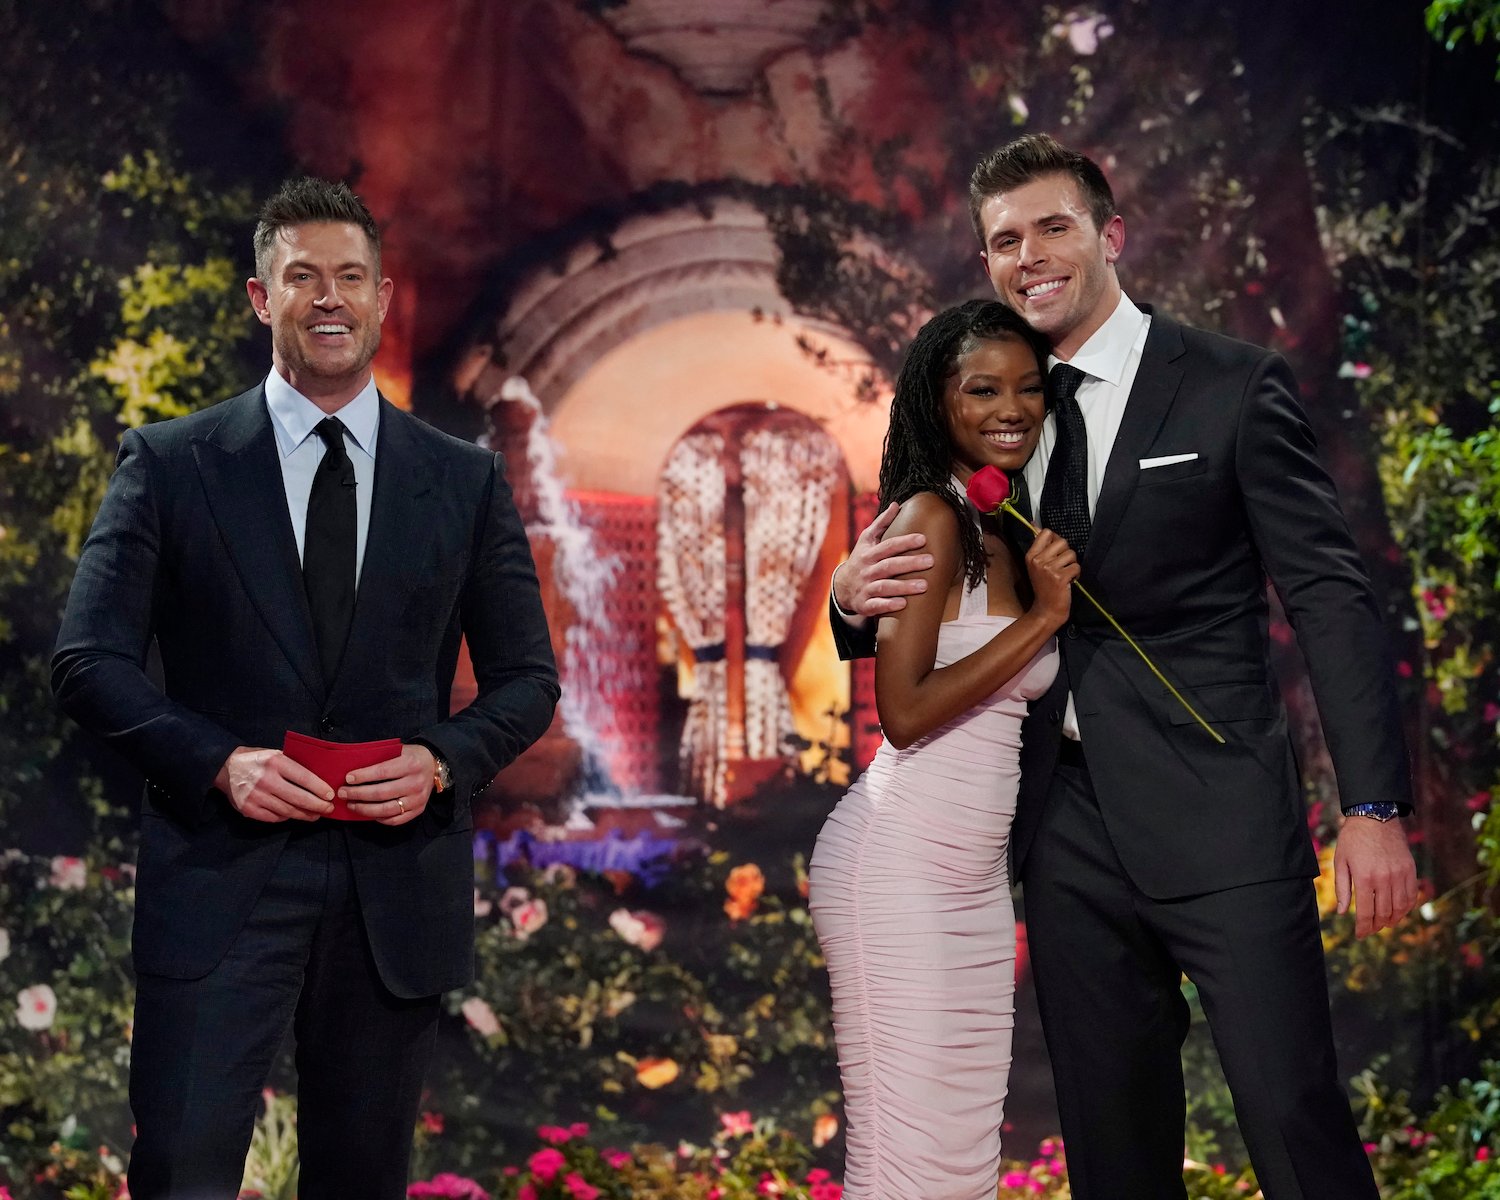 'The Bachelor' lead Zach Shallcross stands next to Brianna Thorbourne and Jesse Palmer. Does Zach's season have a villain?